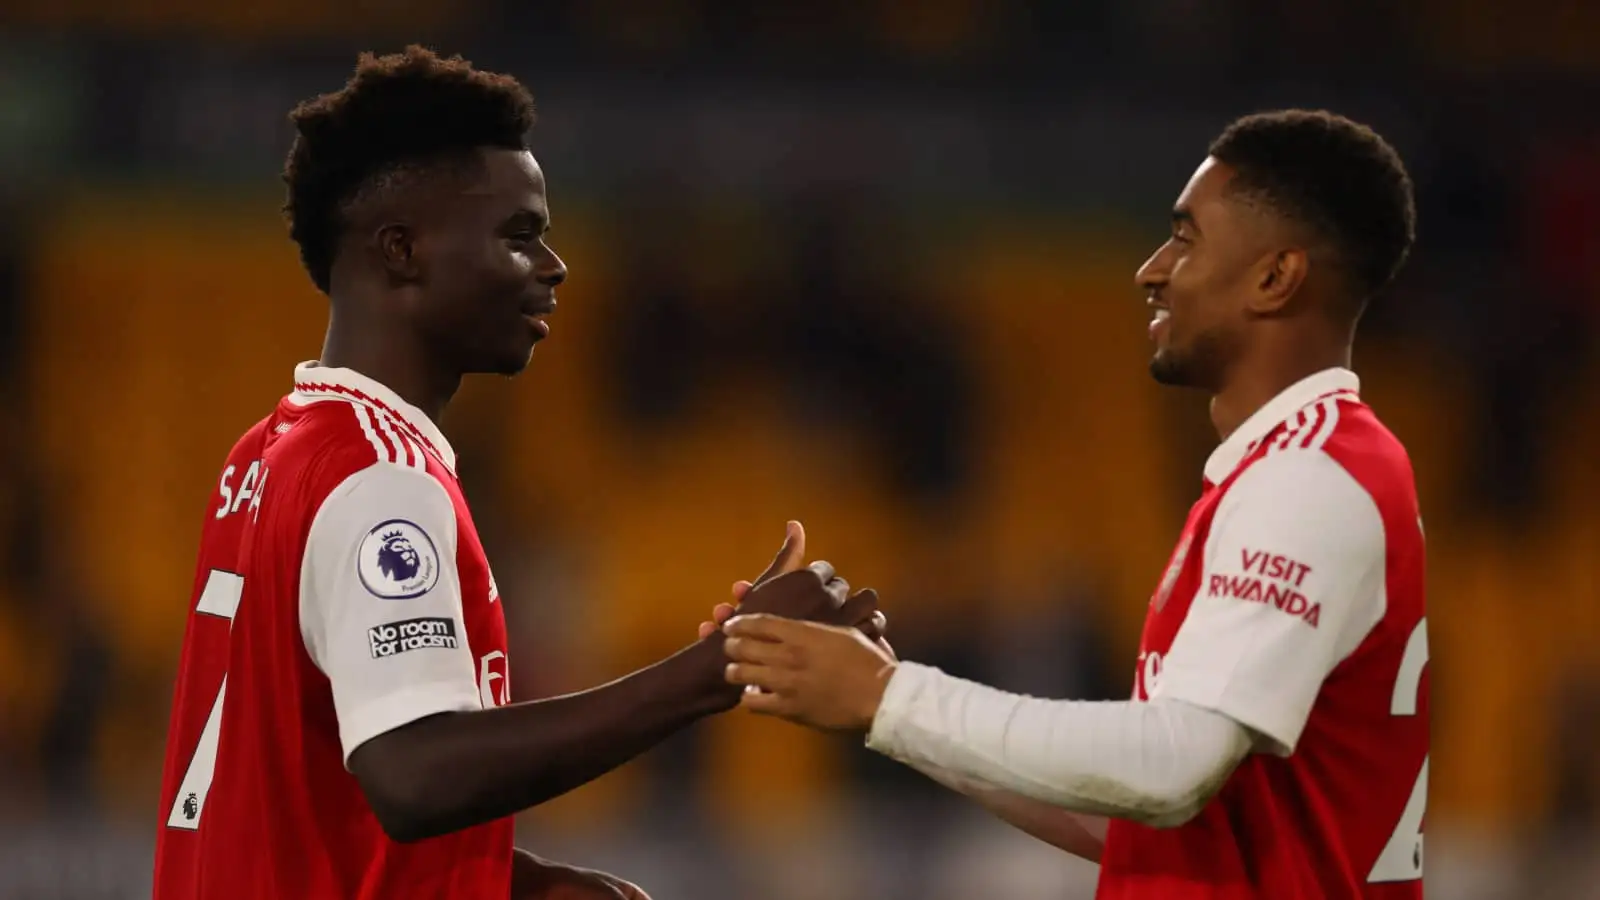 Super-sub Reiss Nelson completes thrilling Arsenal fightback